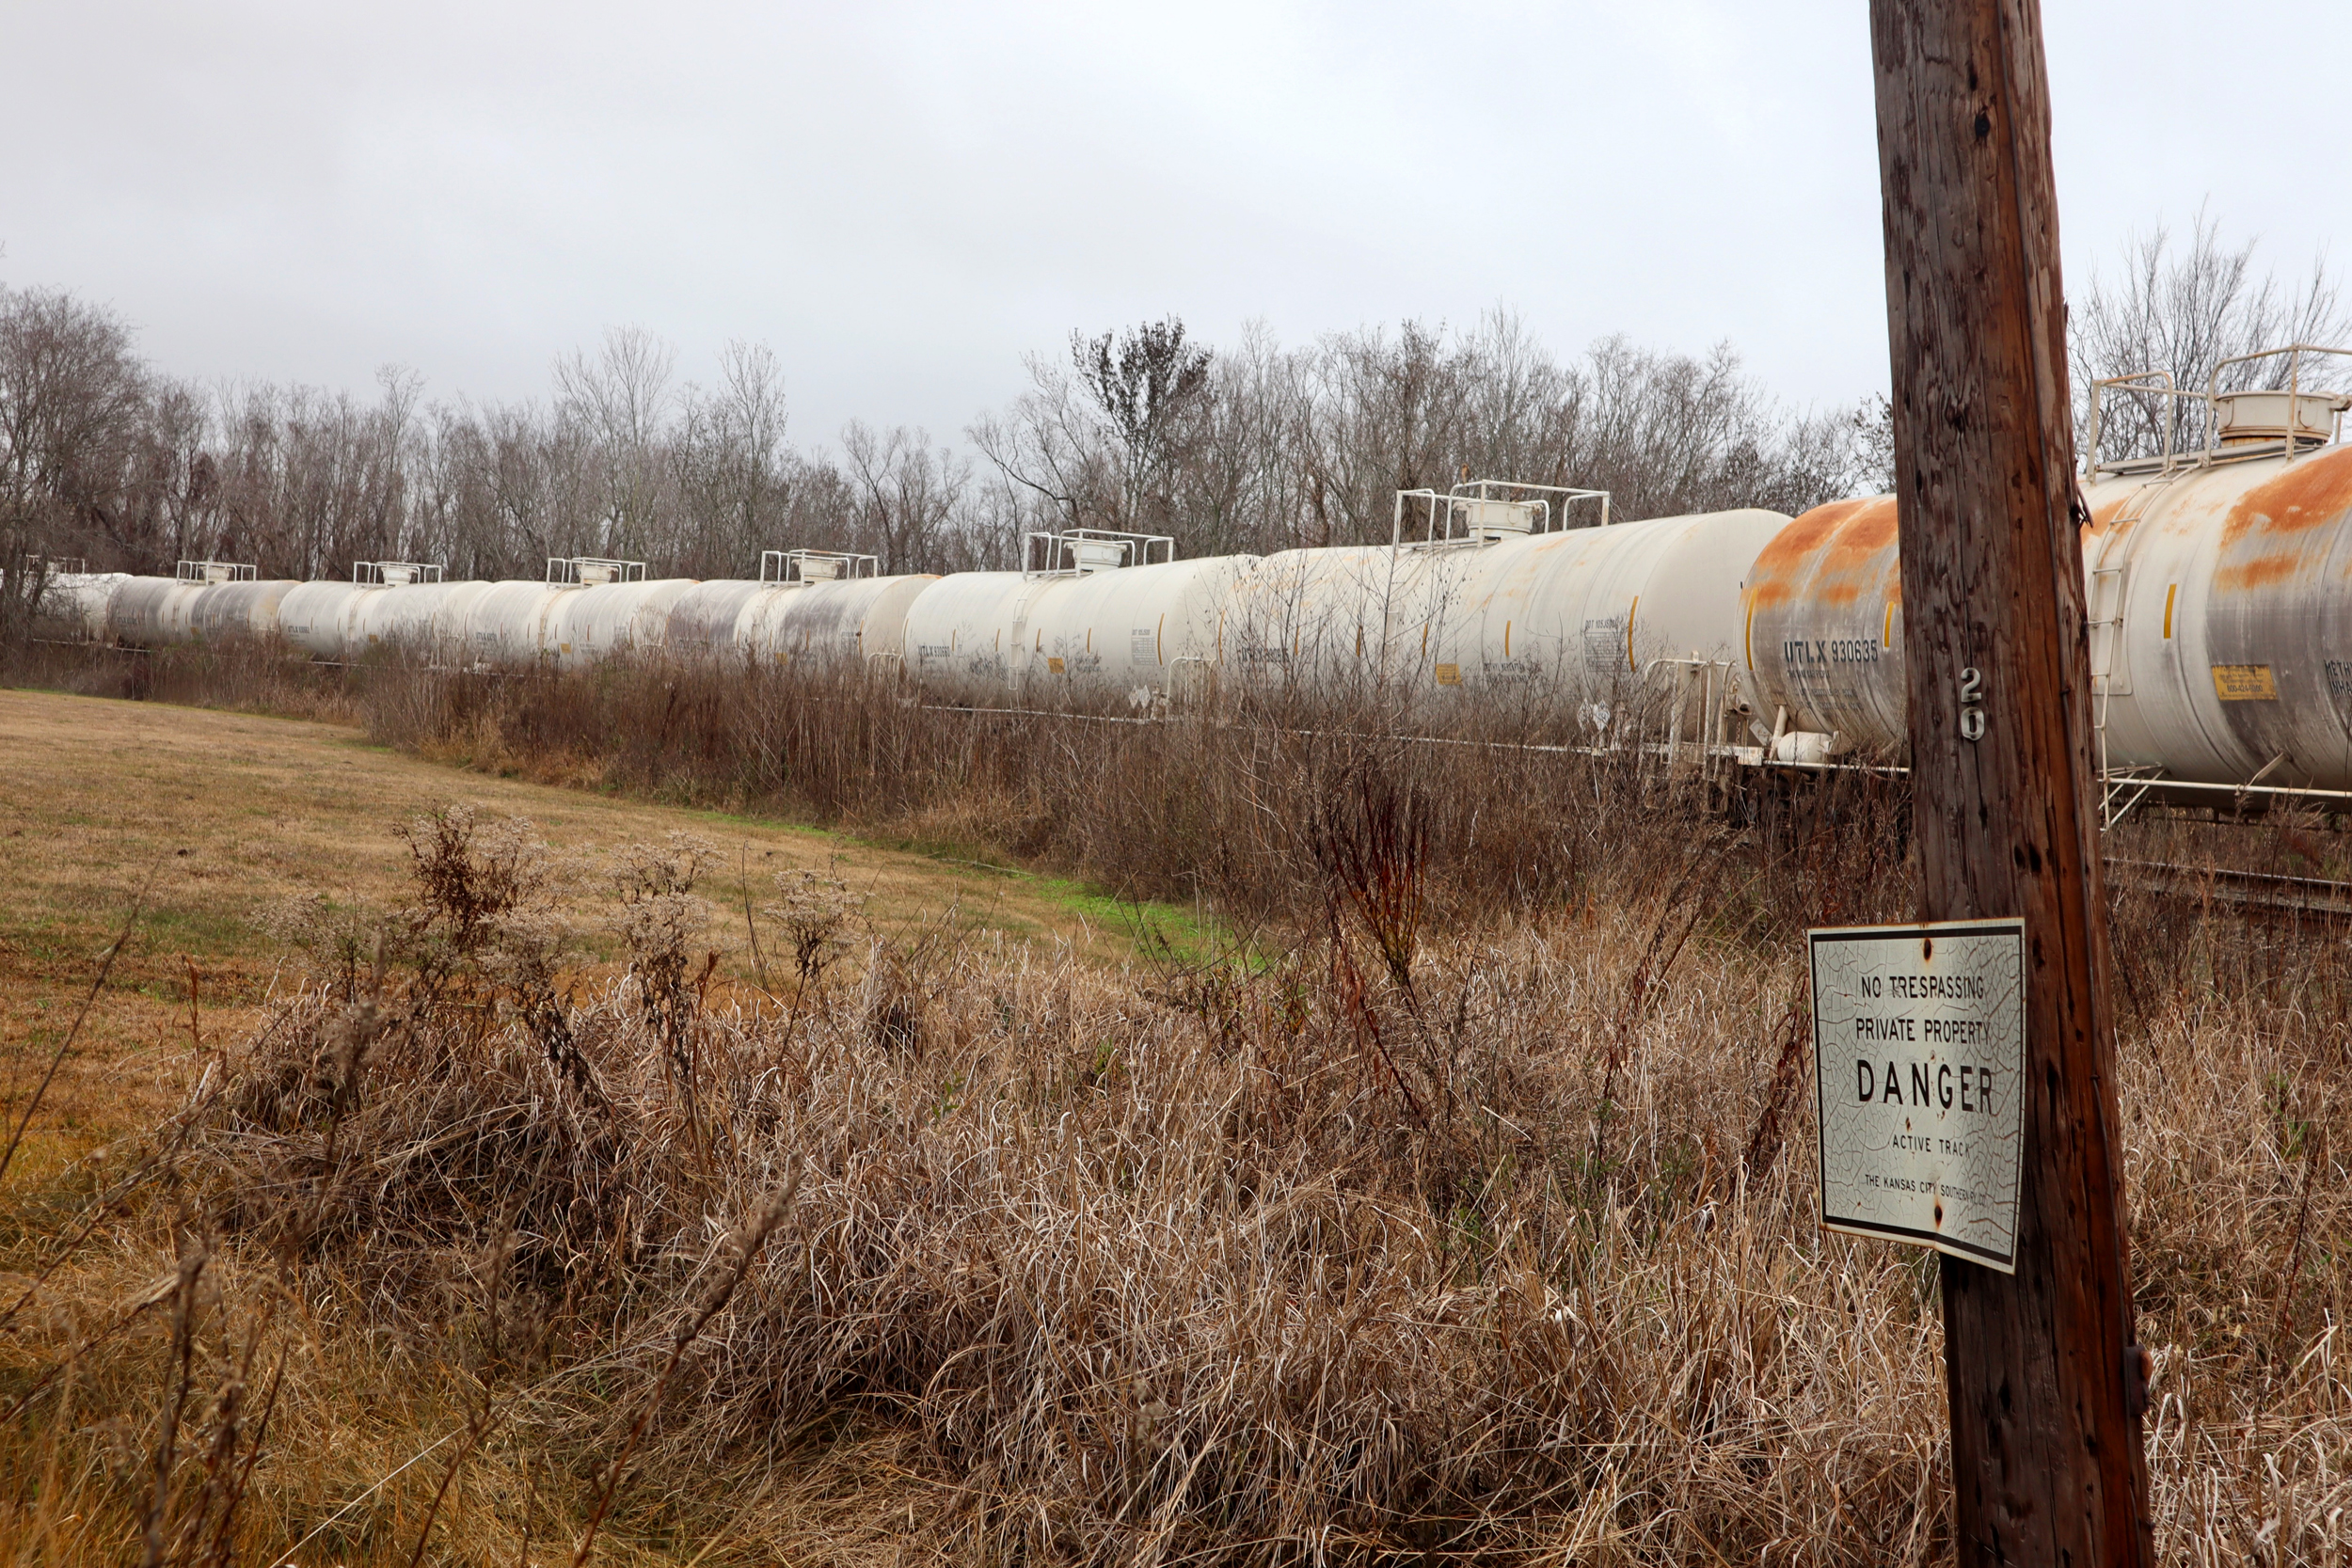 Rail tank cars for hazardous materials are parked along the former back yards of homes and businesses in a residential neighborhood next to the ExxonMobil oil refinery in Beaumont, Texas. Credit: James Bruggers/Inside Climate News